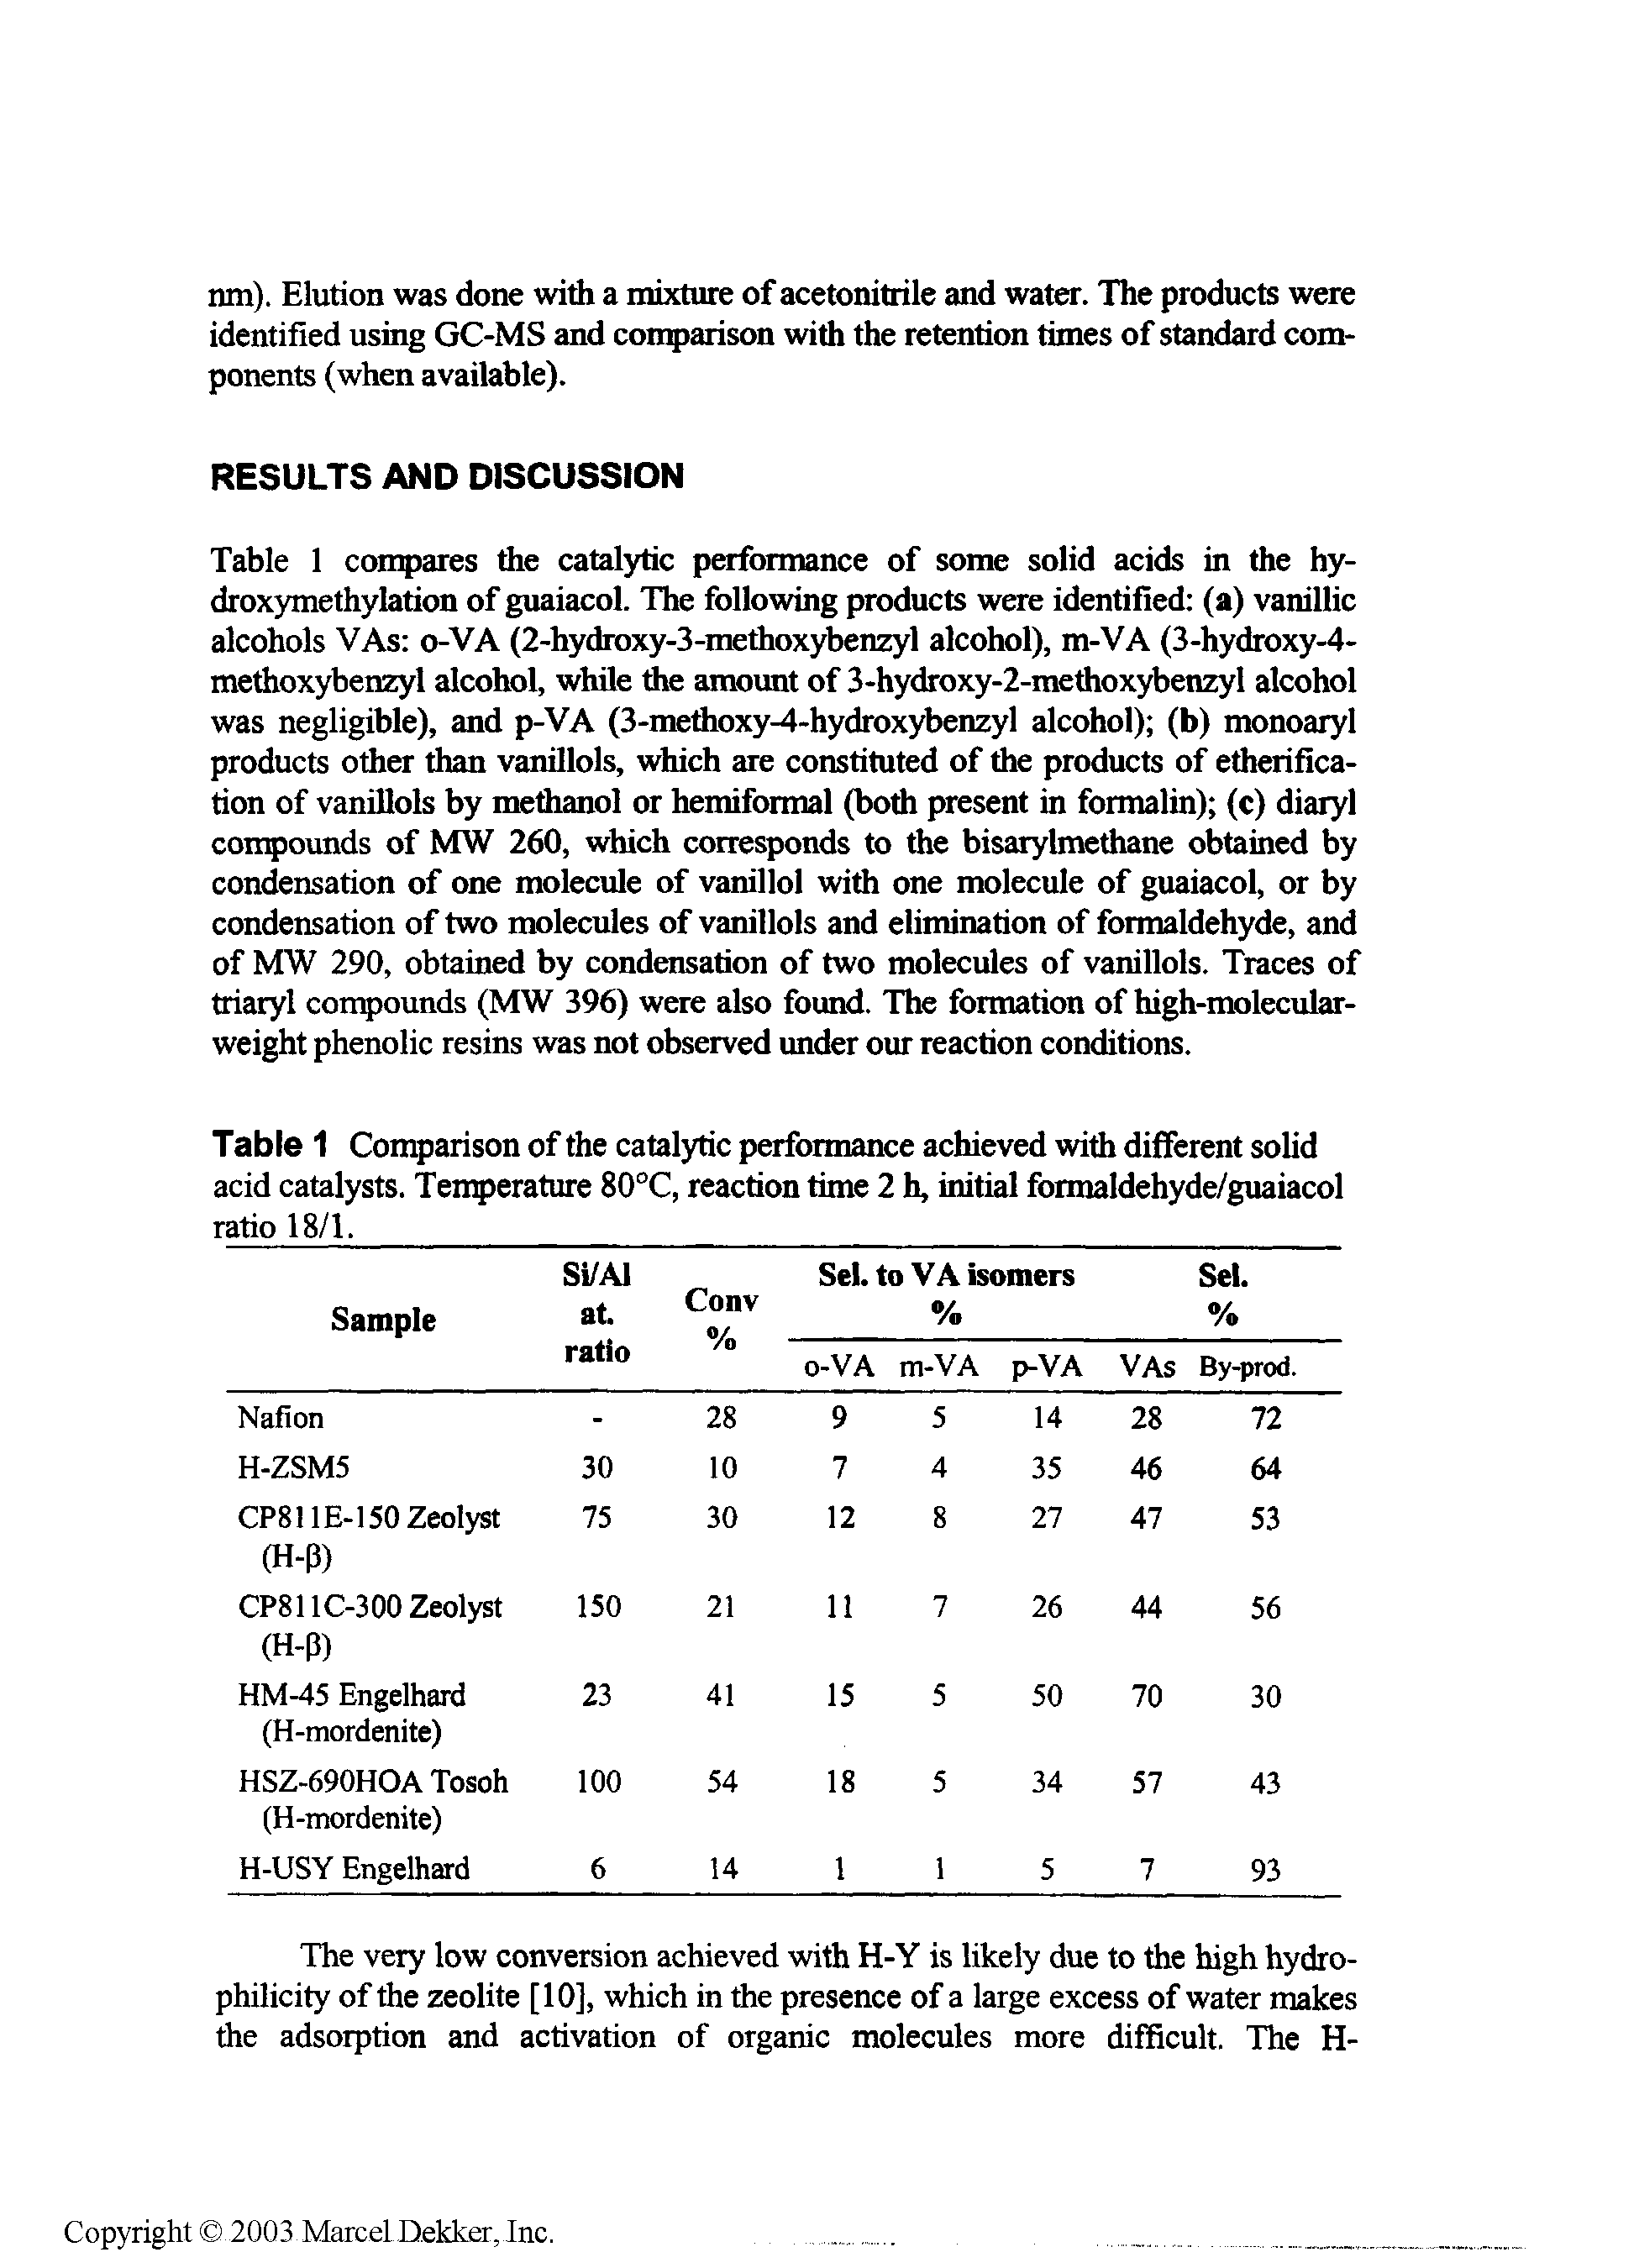 Table 1 Comparison of the catalytic performance achieved with different soUd acid catalysts. Tenperature 80°C, reaction time 2 h, initial formaldehyde/guaiacol ratio 18/1.